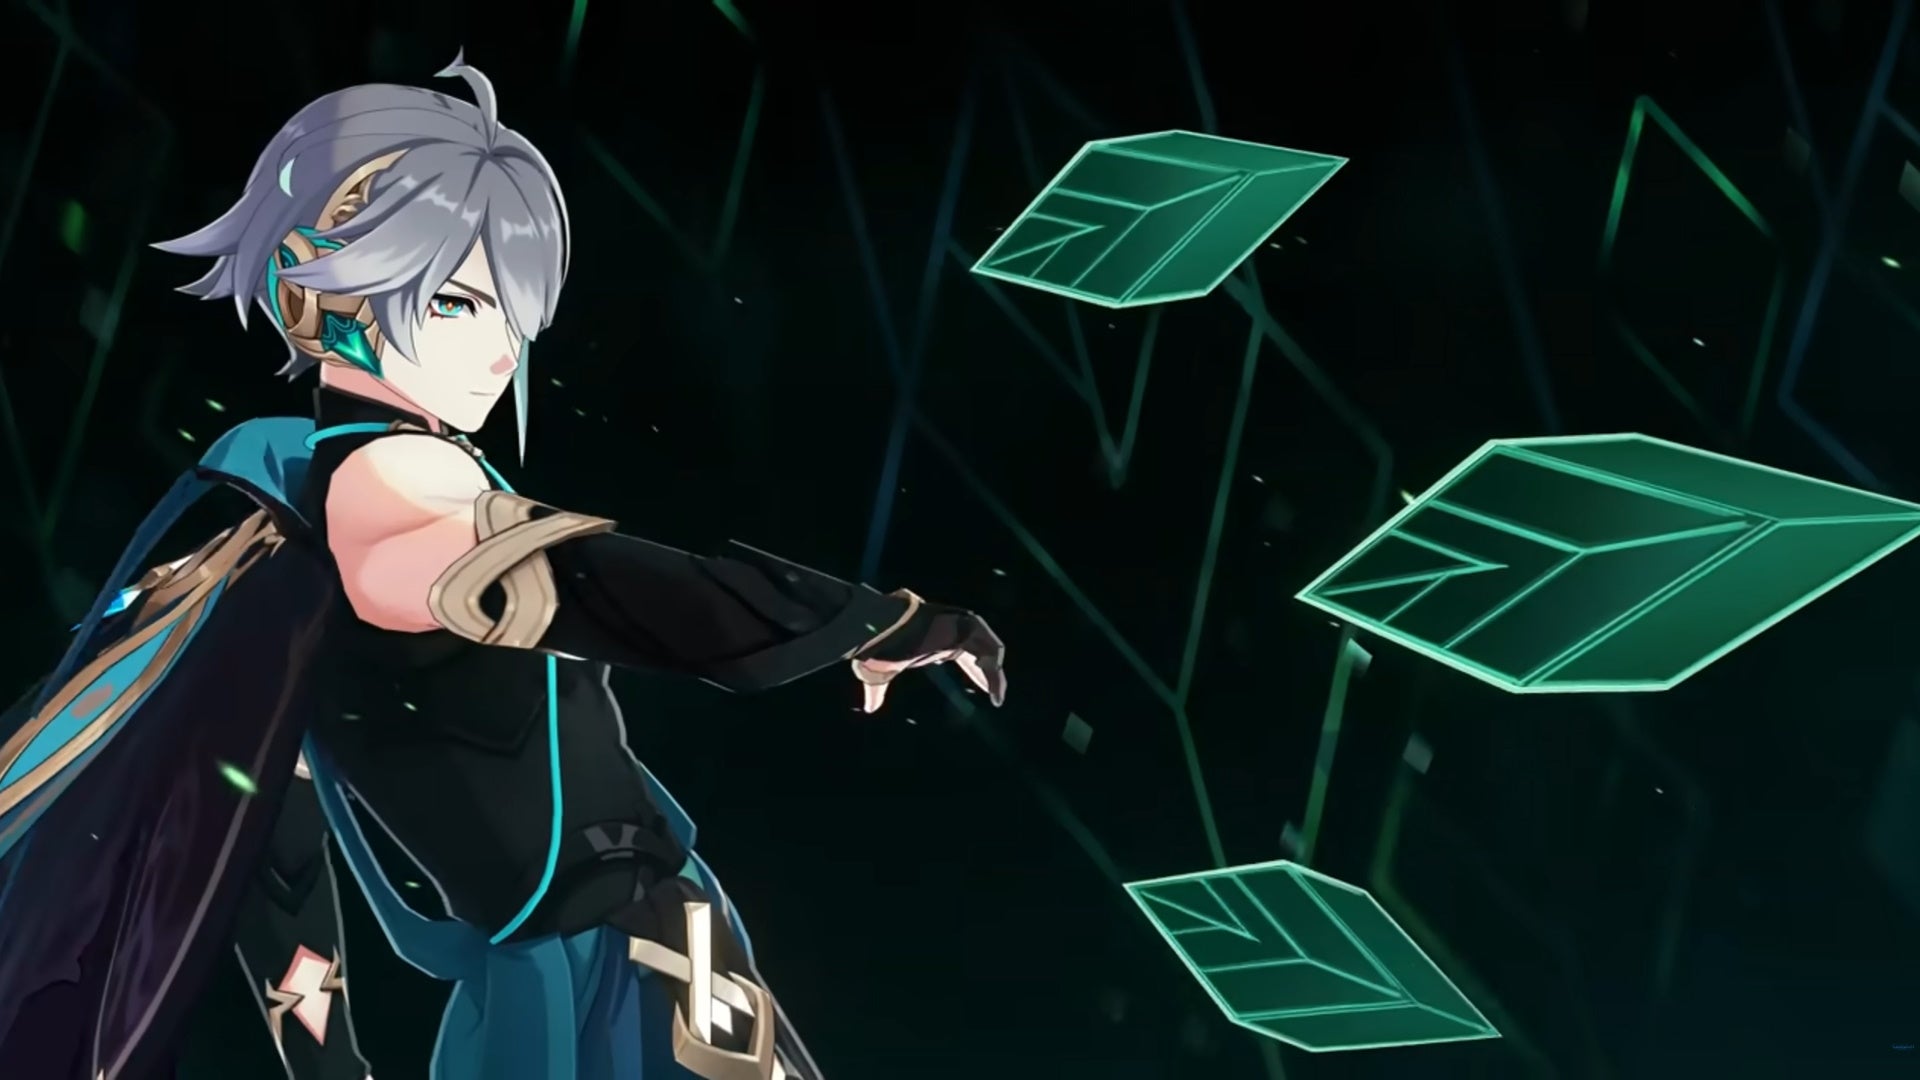 Genshin Impact Alhaitham build: An anime man with short silver hair, wearing a black tunic with a green cape, is throwing three leaf-shaped mirrors offscreen